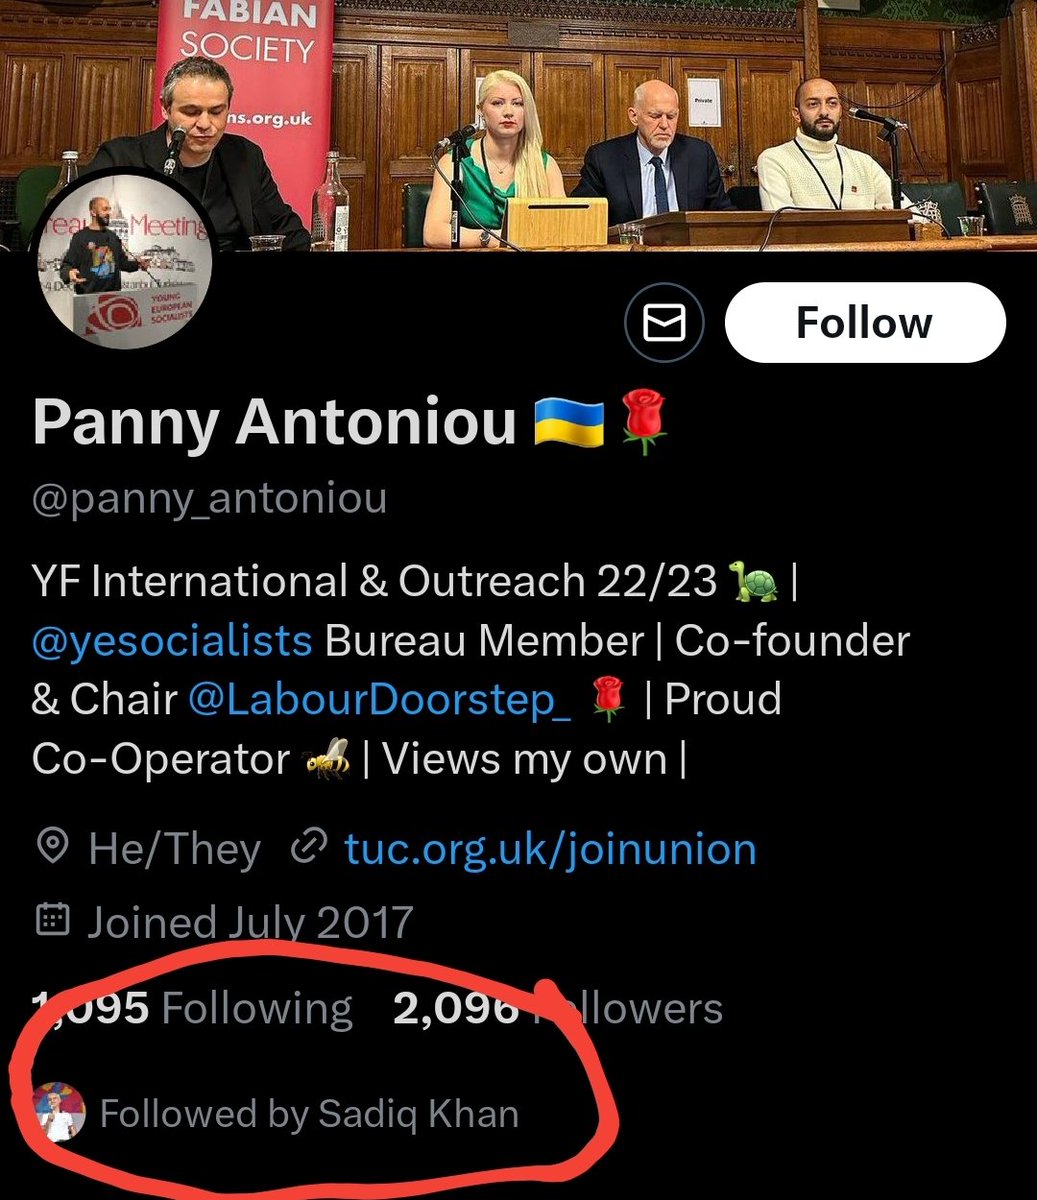 You're followed by Sadiq Khan!
FFS! There goes your credibility, you gormless nobjockey!😄😆🤣
Does Sadiq come to you for advice on knife-crime? : Camden is one of London's biggest knife-crime hotspots, isn't?
Maybe spend more time on that instead of trawling for 'transcrimes'?🤡